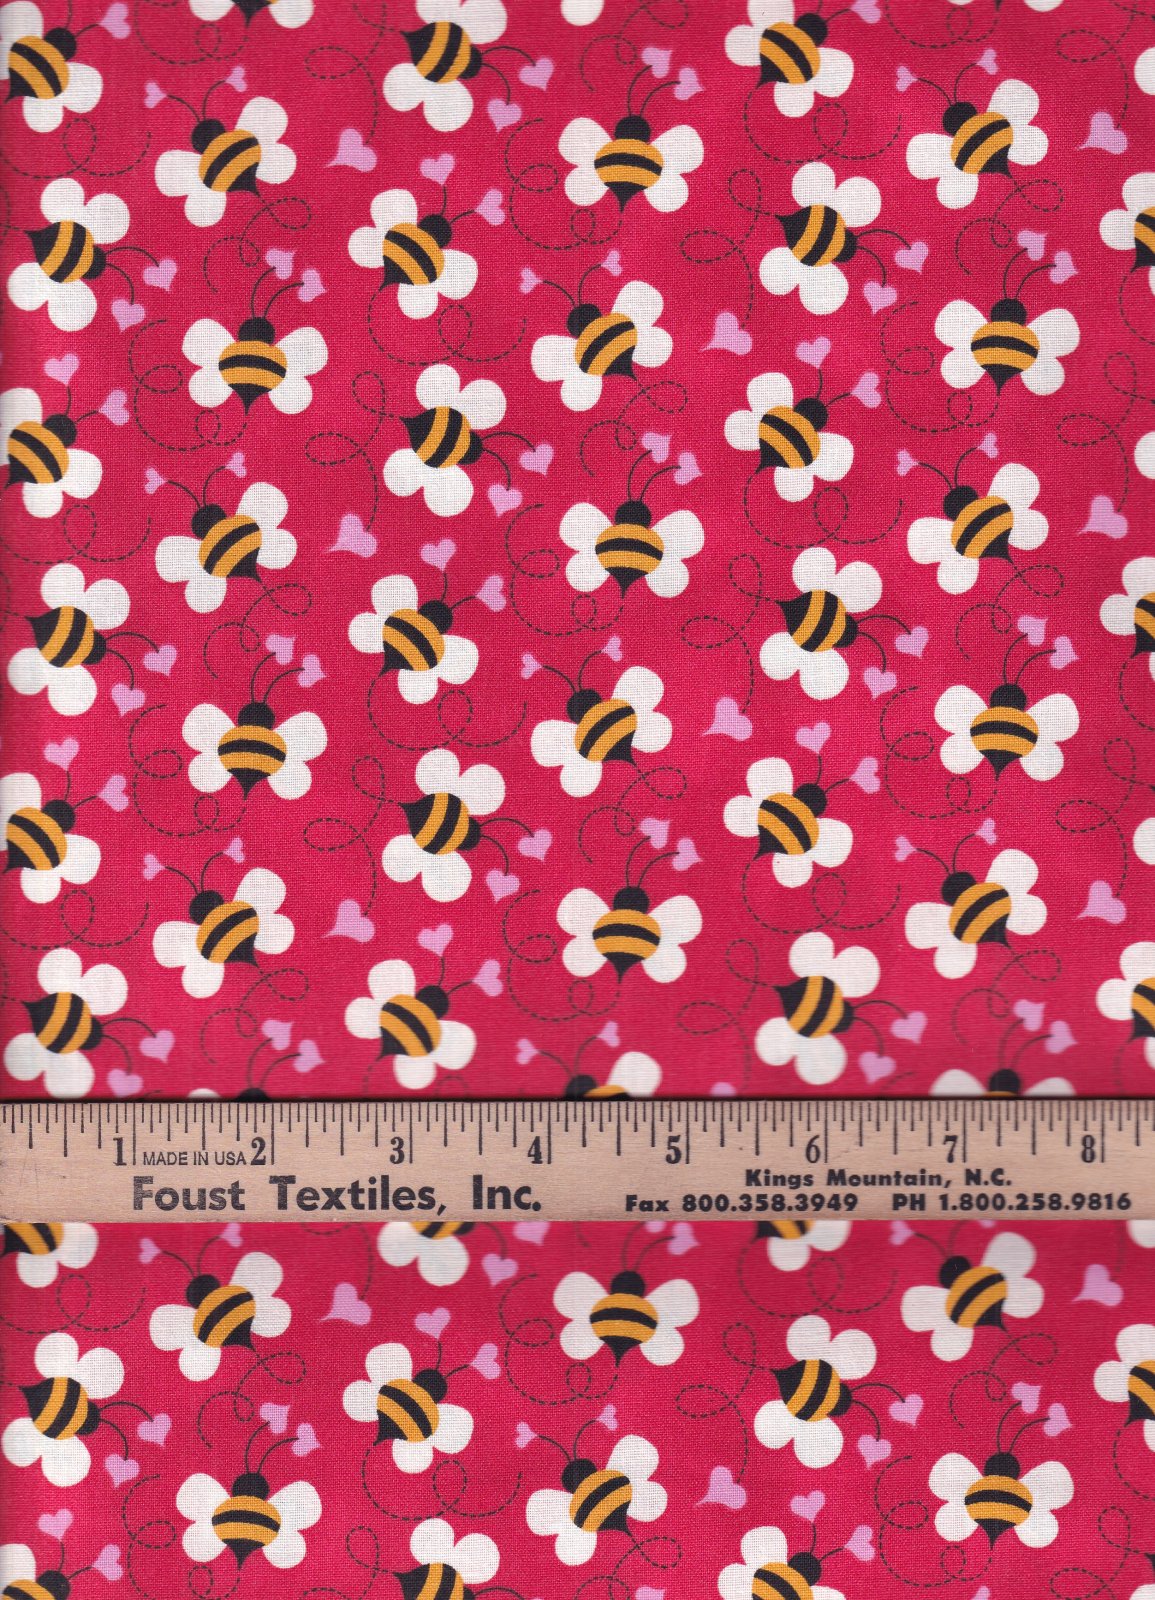 44 x 36 Valentine Bees Buzzing in Love Red Fabric Traditions 100% Cotton